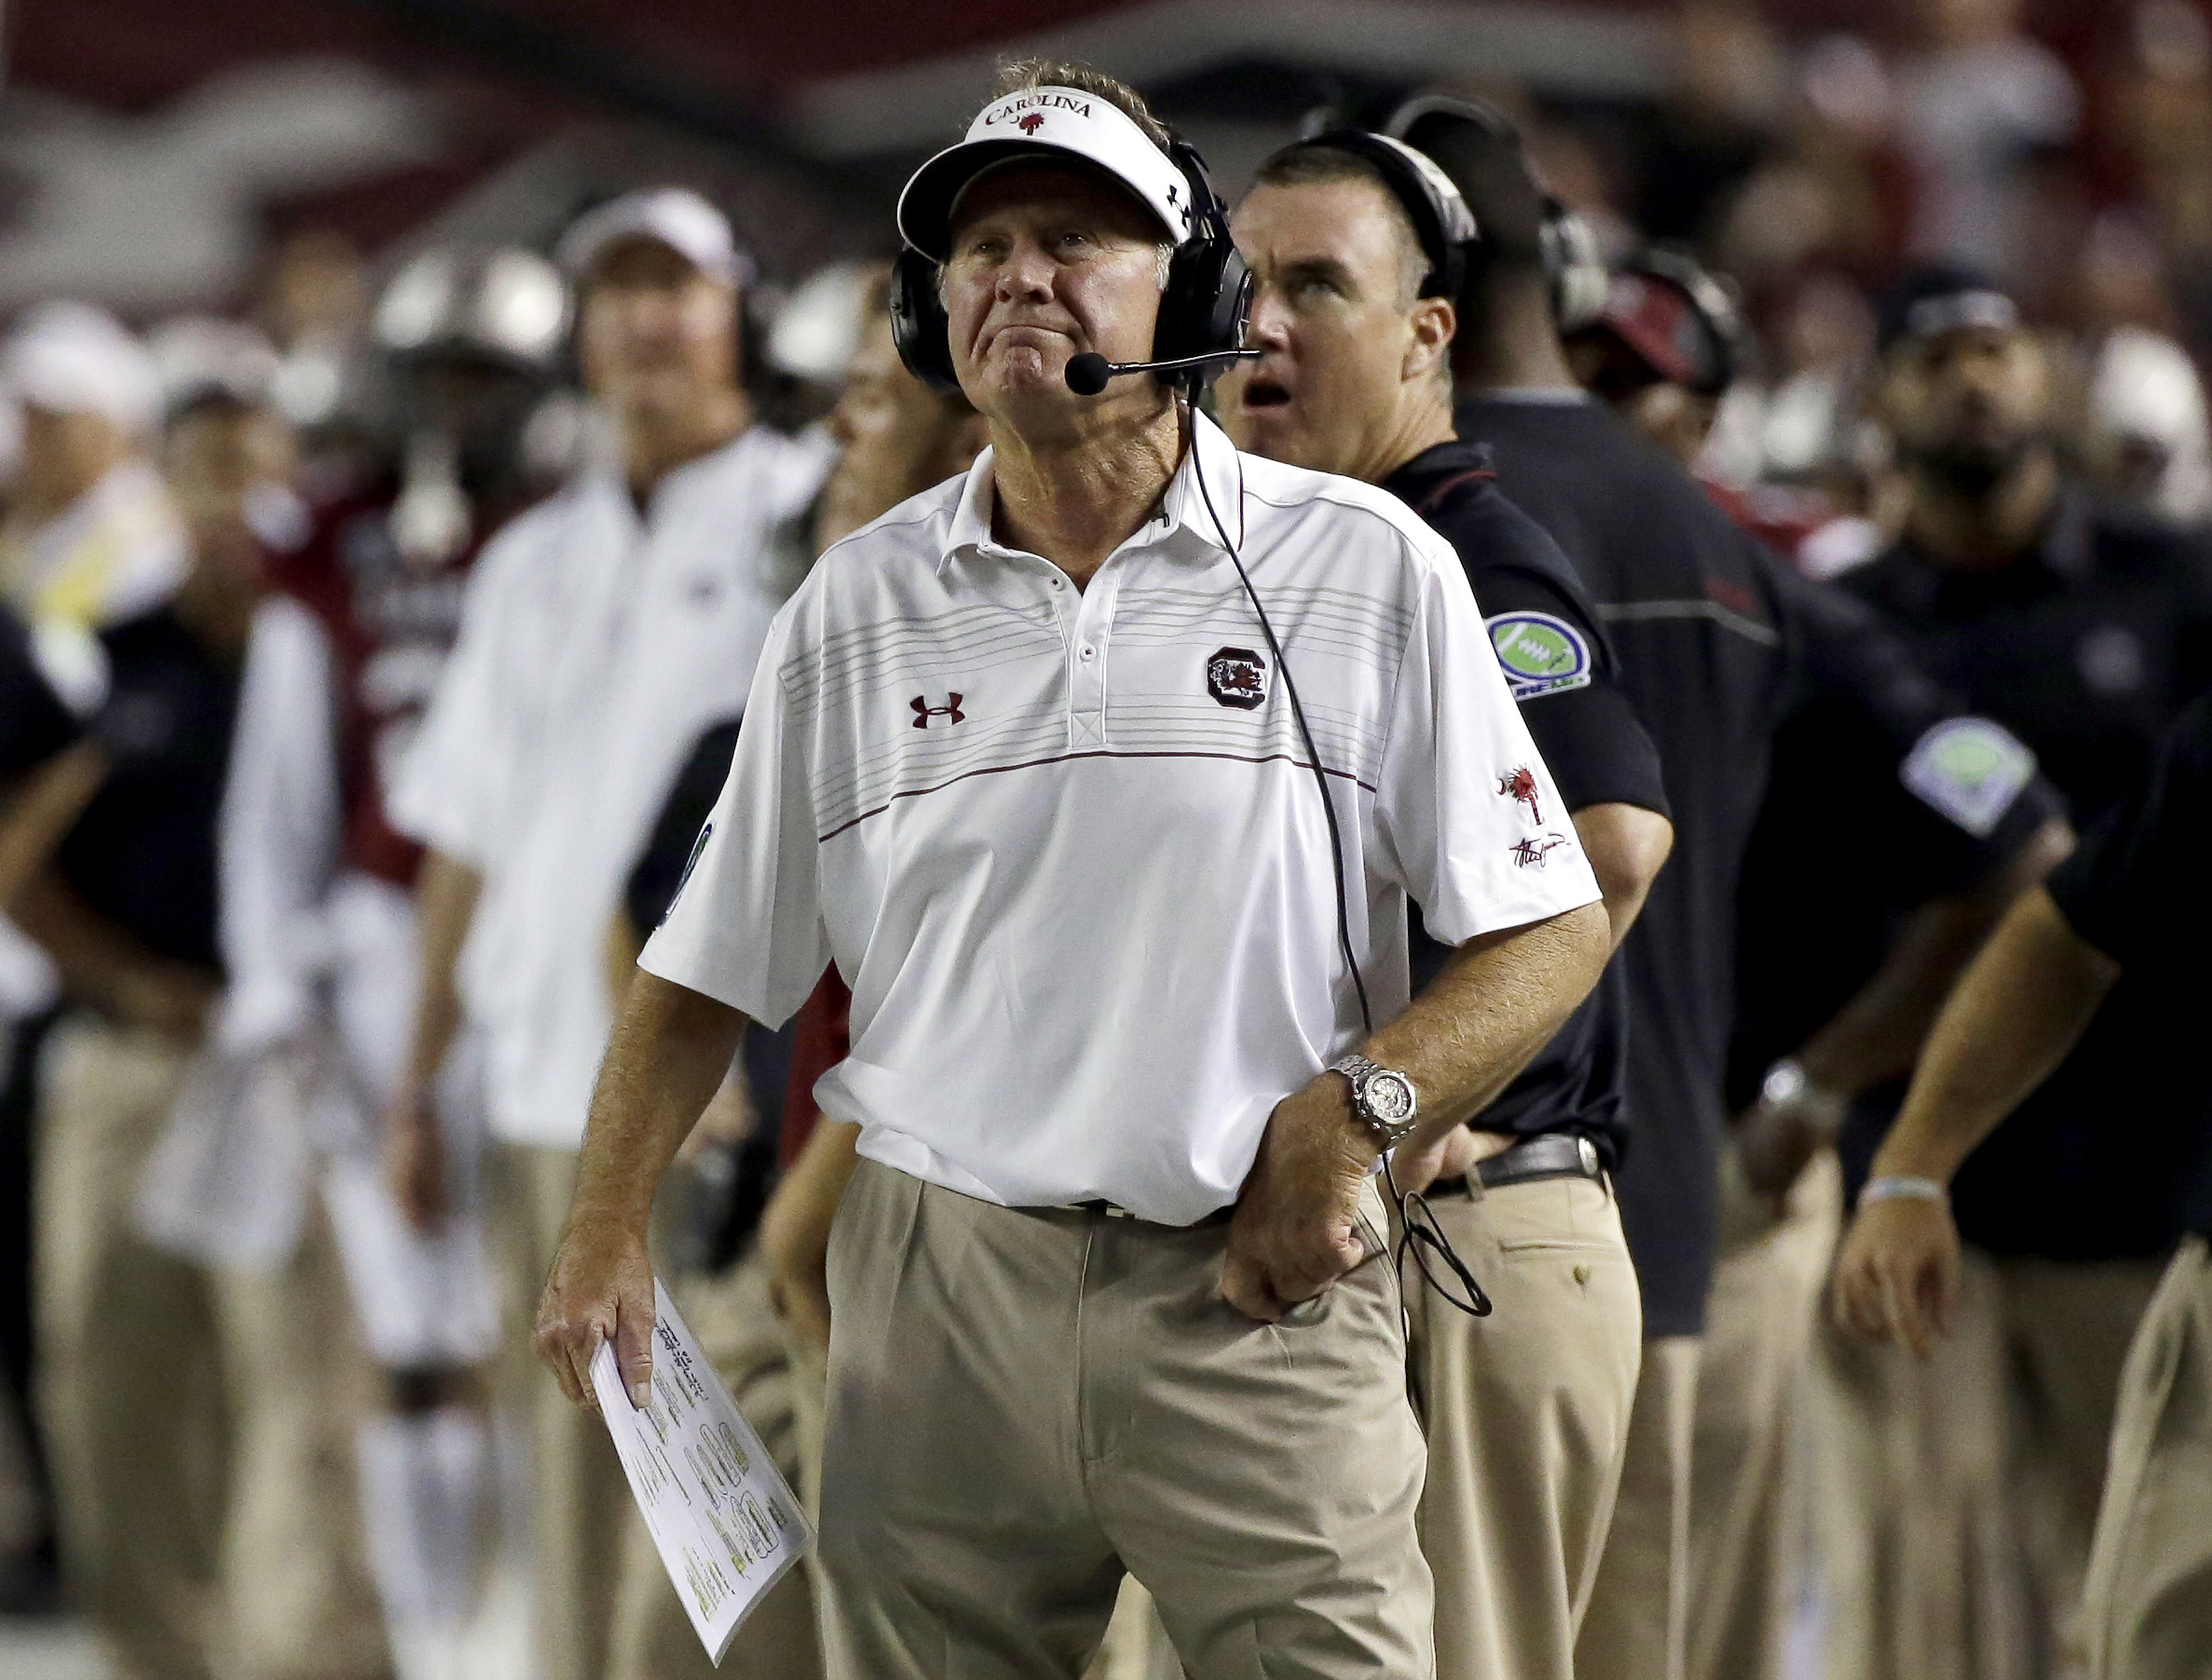 South Carolina head coach Steve Spurrier reacts to a call on the sidelines during the first half against Missouri on, Saturday, Sept. 27, 2014, in Columbia, S.C. (AP Photo/Stephen B. Morton)